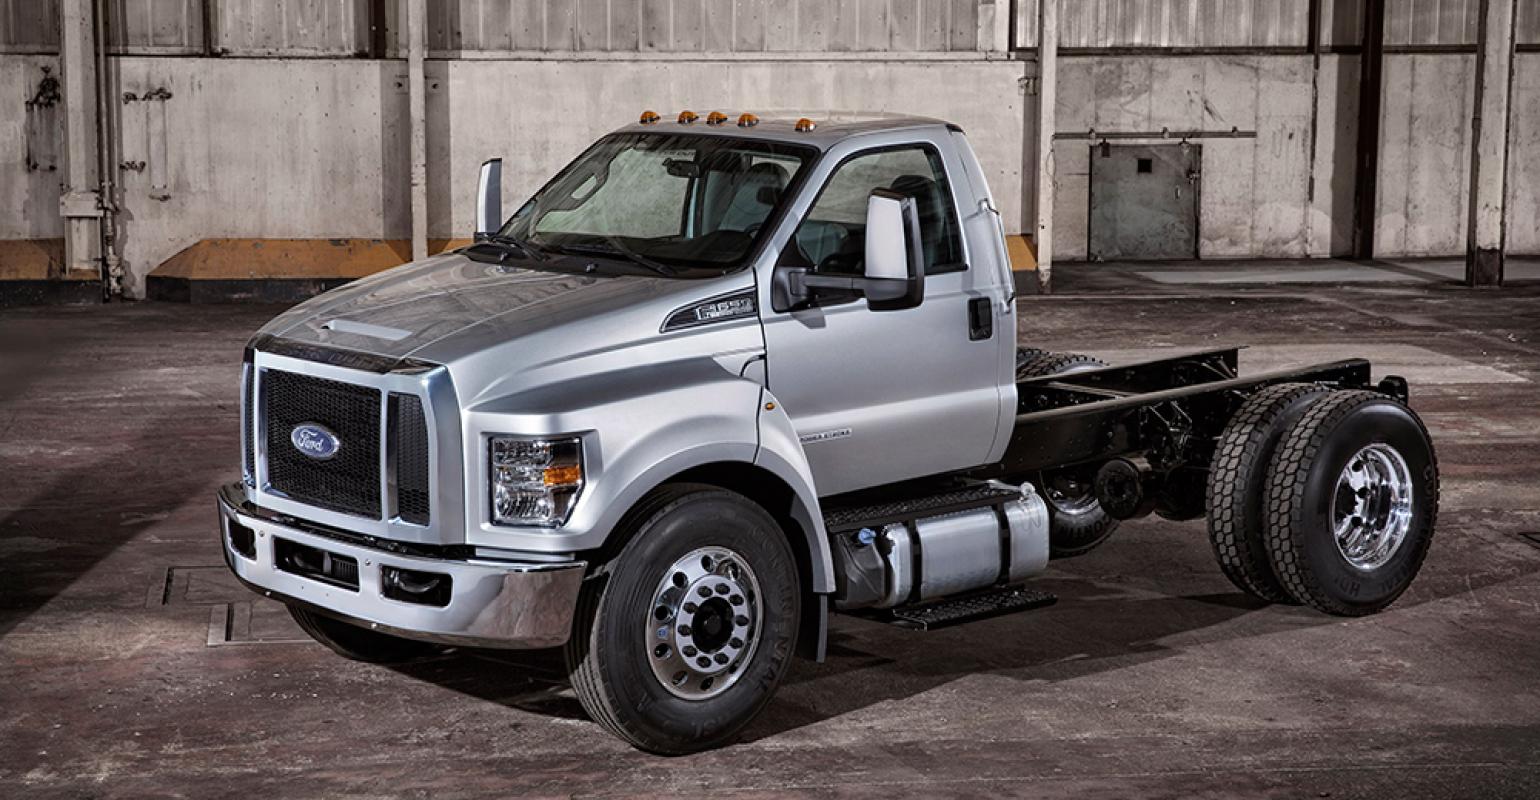 Blue Diamond Ford Logo - Ford To Shift Medium Duty Truck Production From Mexico To Ohio